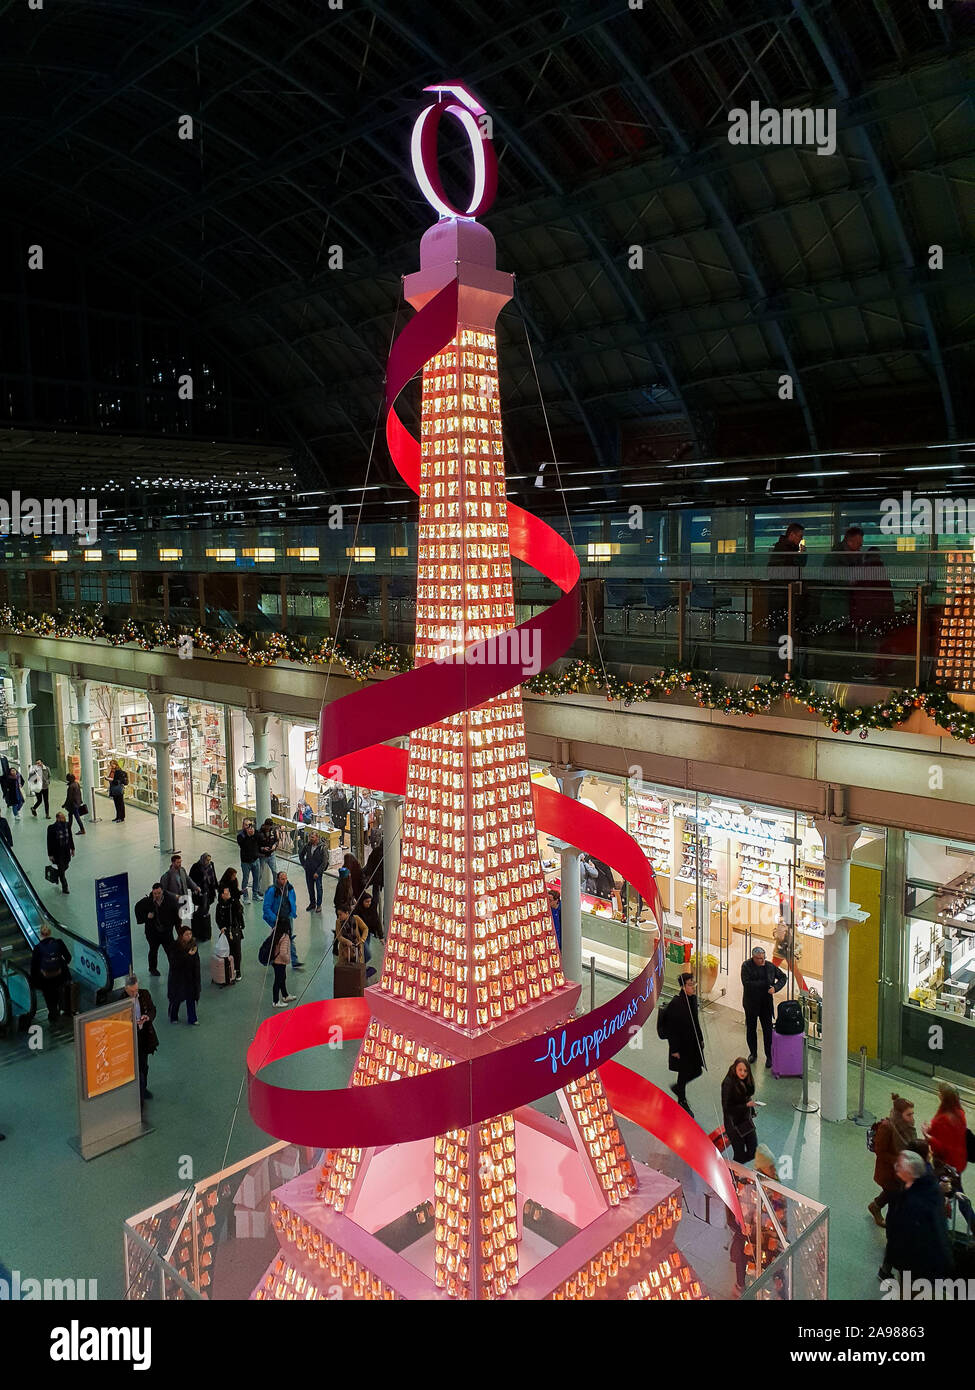 Kings Cross St Pancras. London. UK 13 Nov 2019 - “The Eiffel Tower” installation at Kings Cross St Pancras International rail station. Lancome has teamed up with Kings Cross St Pancras as it unveils its 2019 Christmas installation of Paris’s iconic landmark - The Eiffel Tower. The 36-foot installation embodies the elegance and cheerful spirit of the world’s largest French beauty brand, brightening up the station with Lancôme’s signature pink pantone. Credit: Dinendra Haria/Alamy Live News Stock Photo